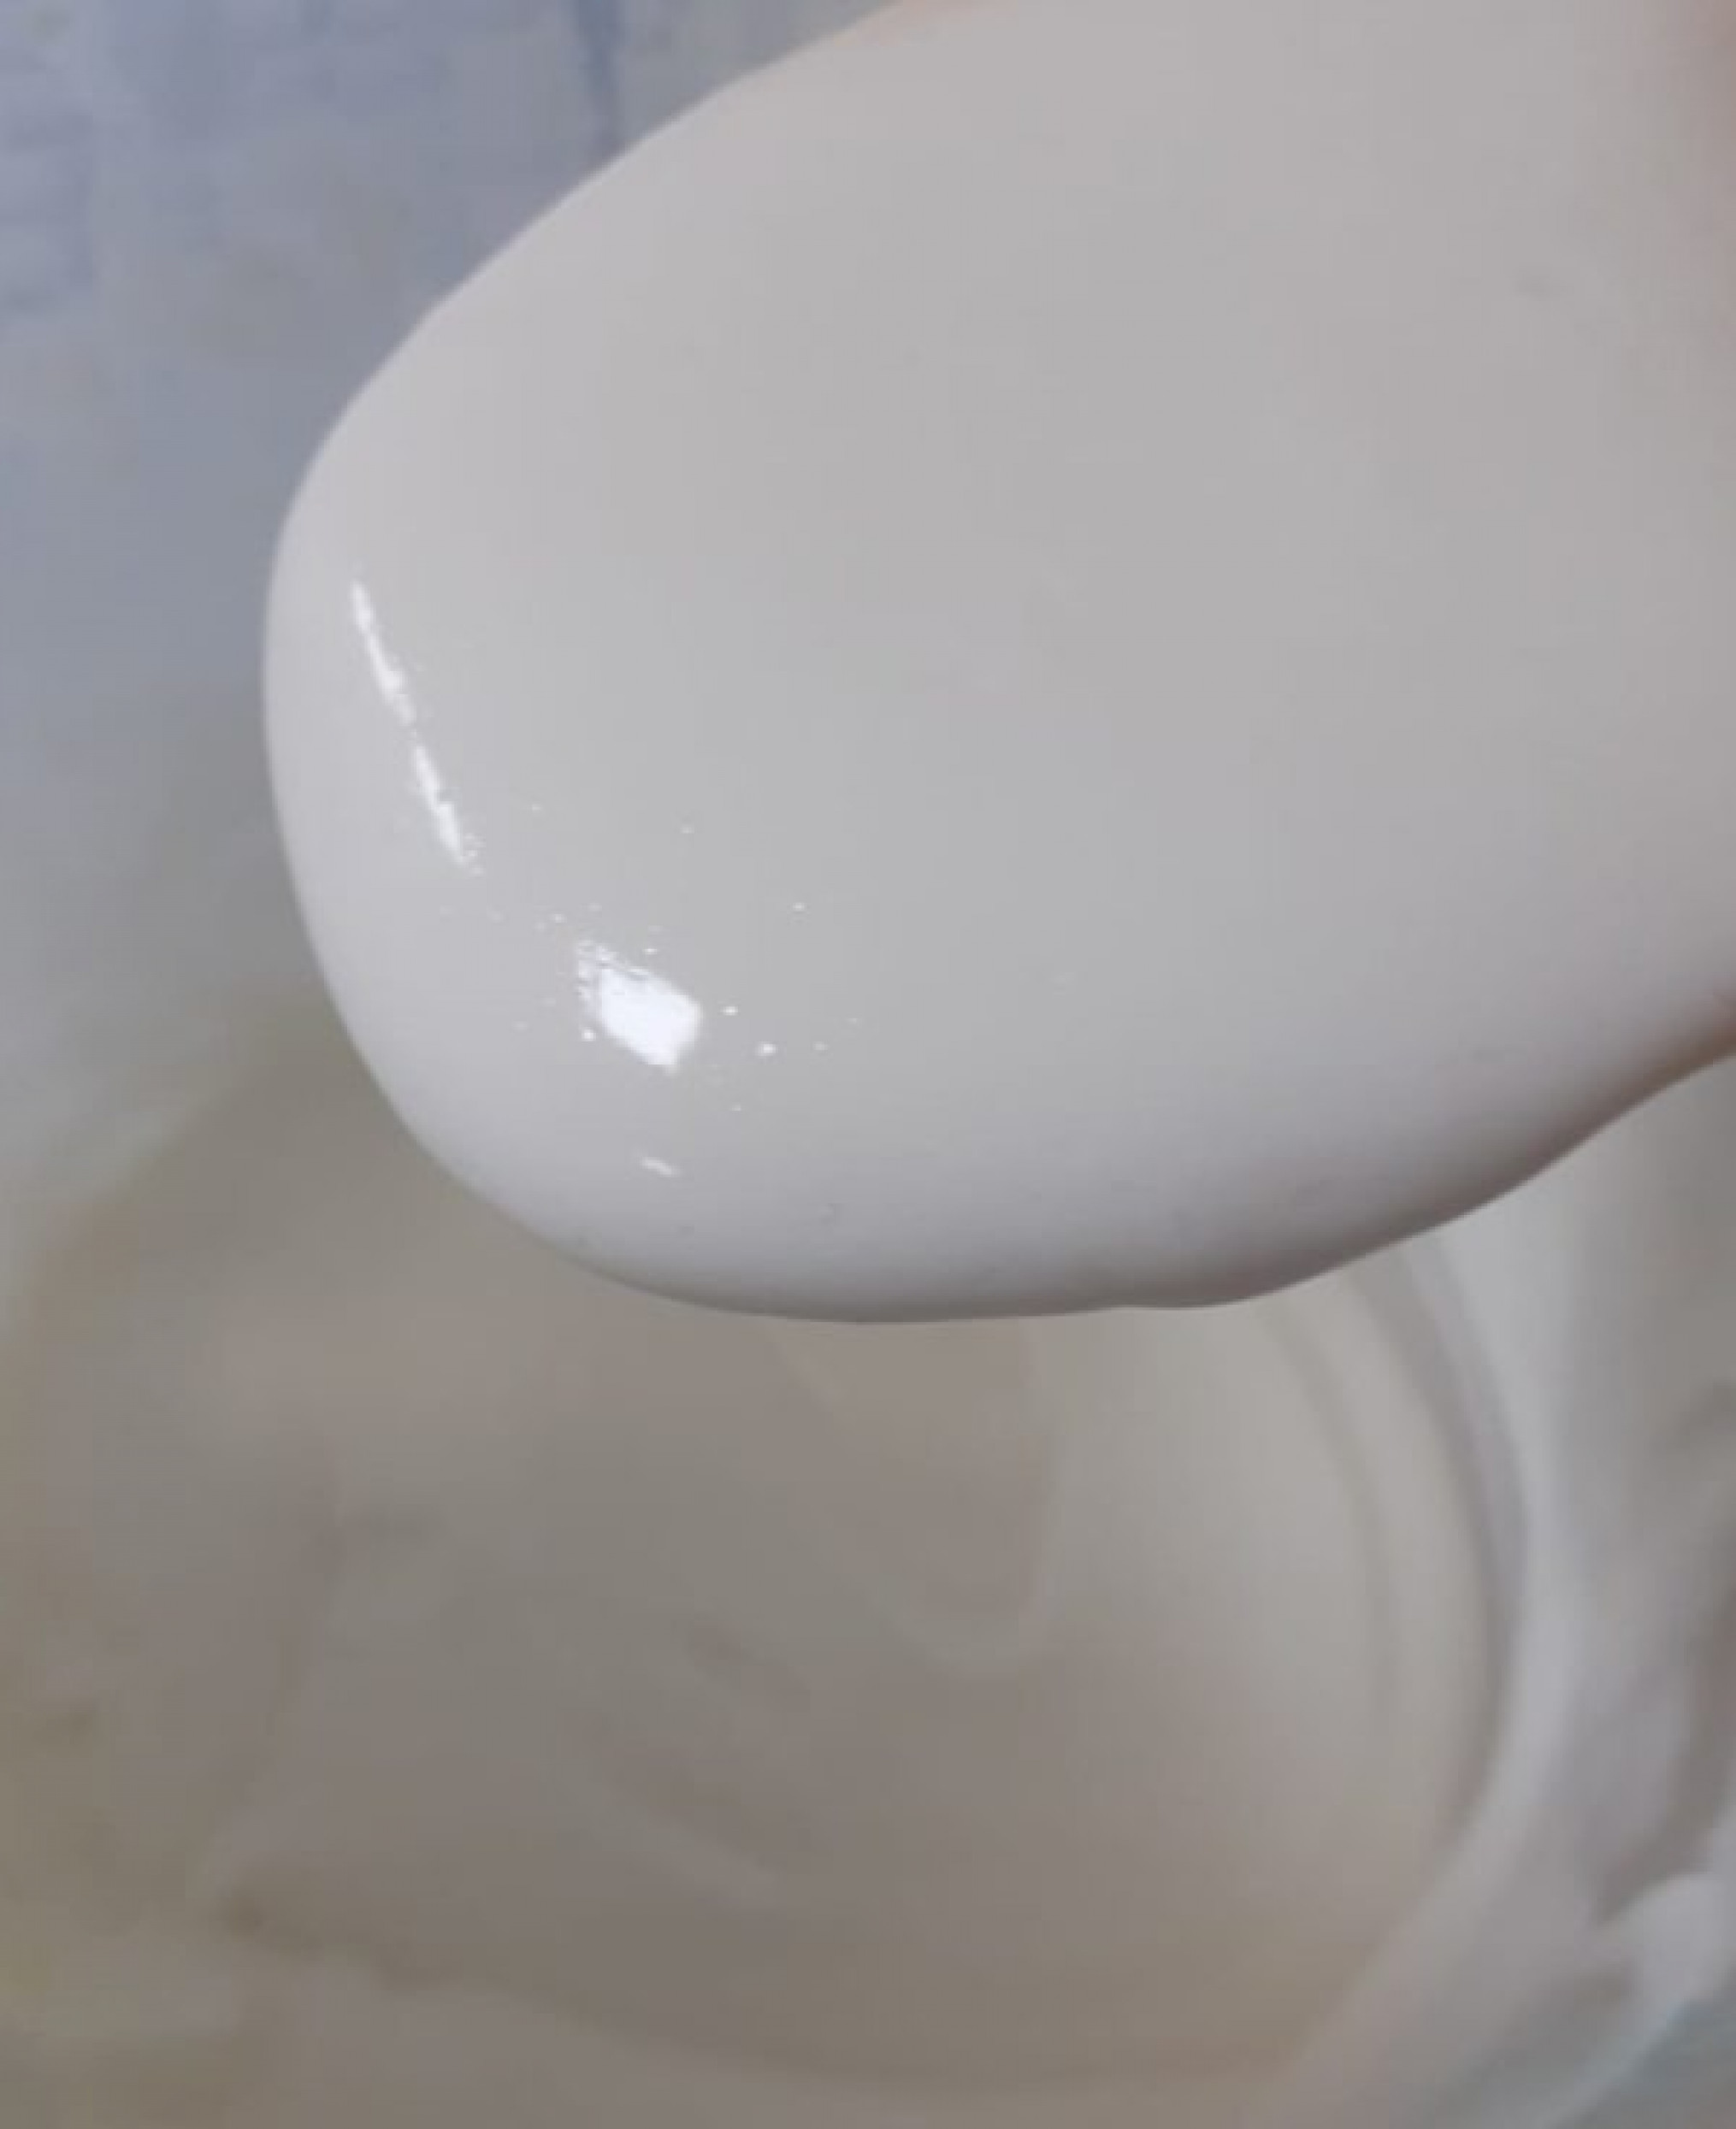 Lotion Base Manufacturers in India, Body Lotion Base Exporter